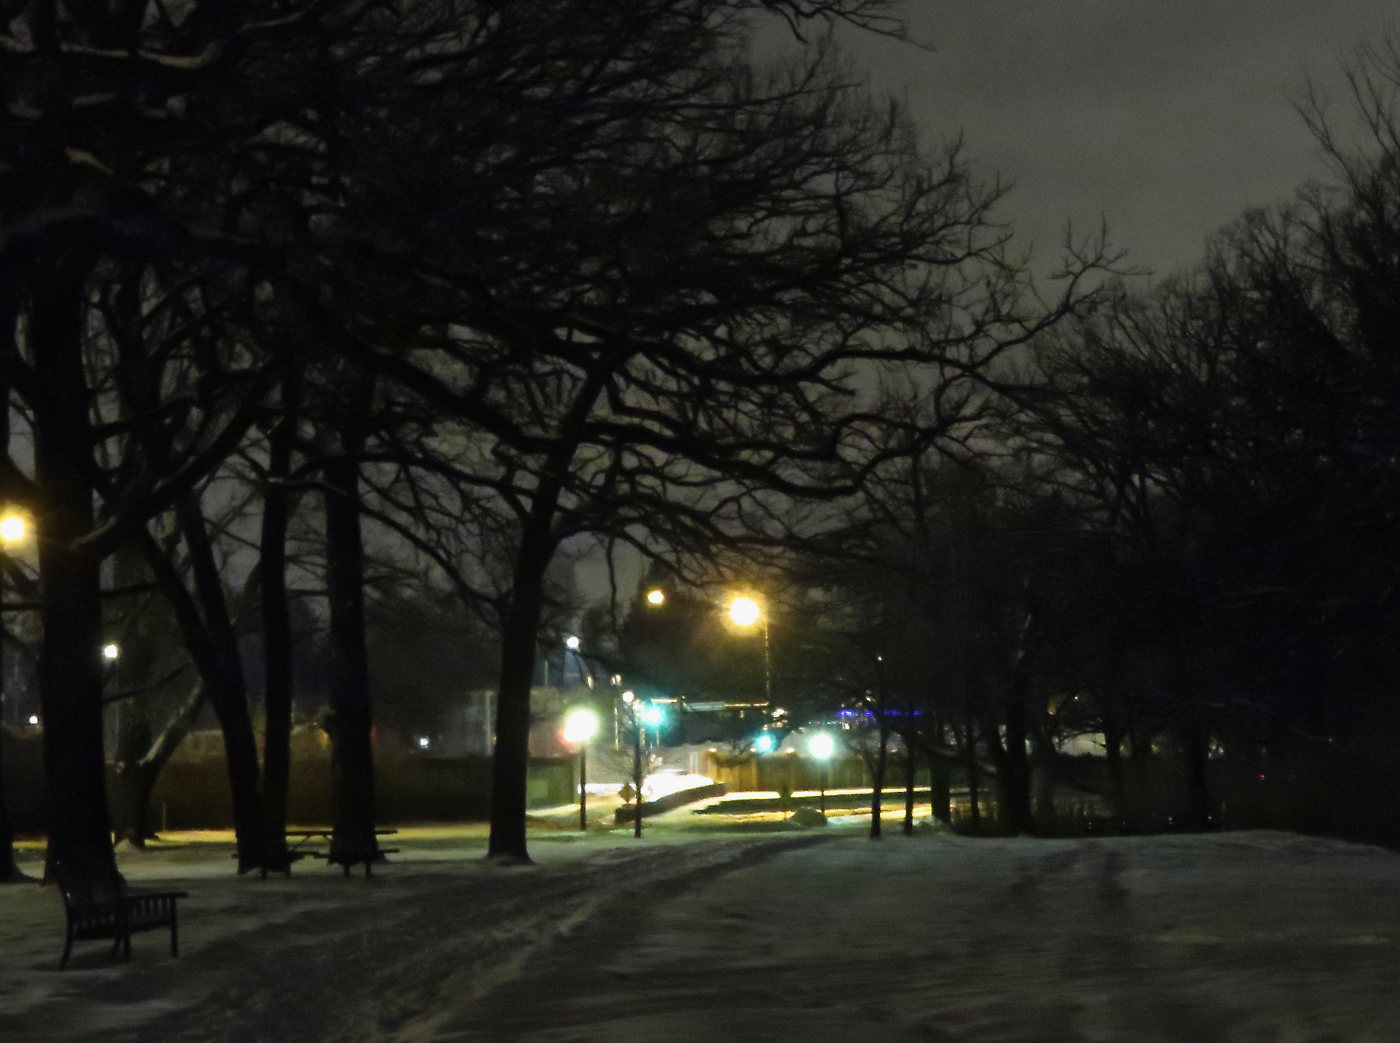 night scene with bare trees in a snowy landscape with some glowing street lights in the background